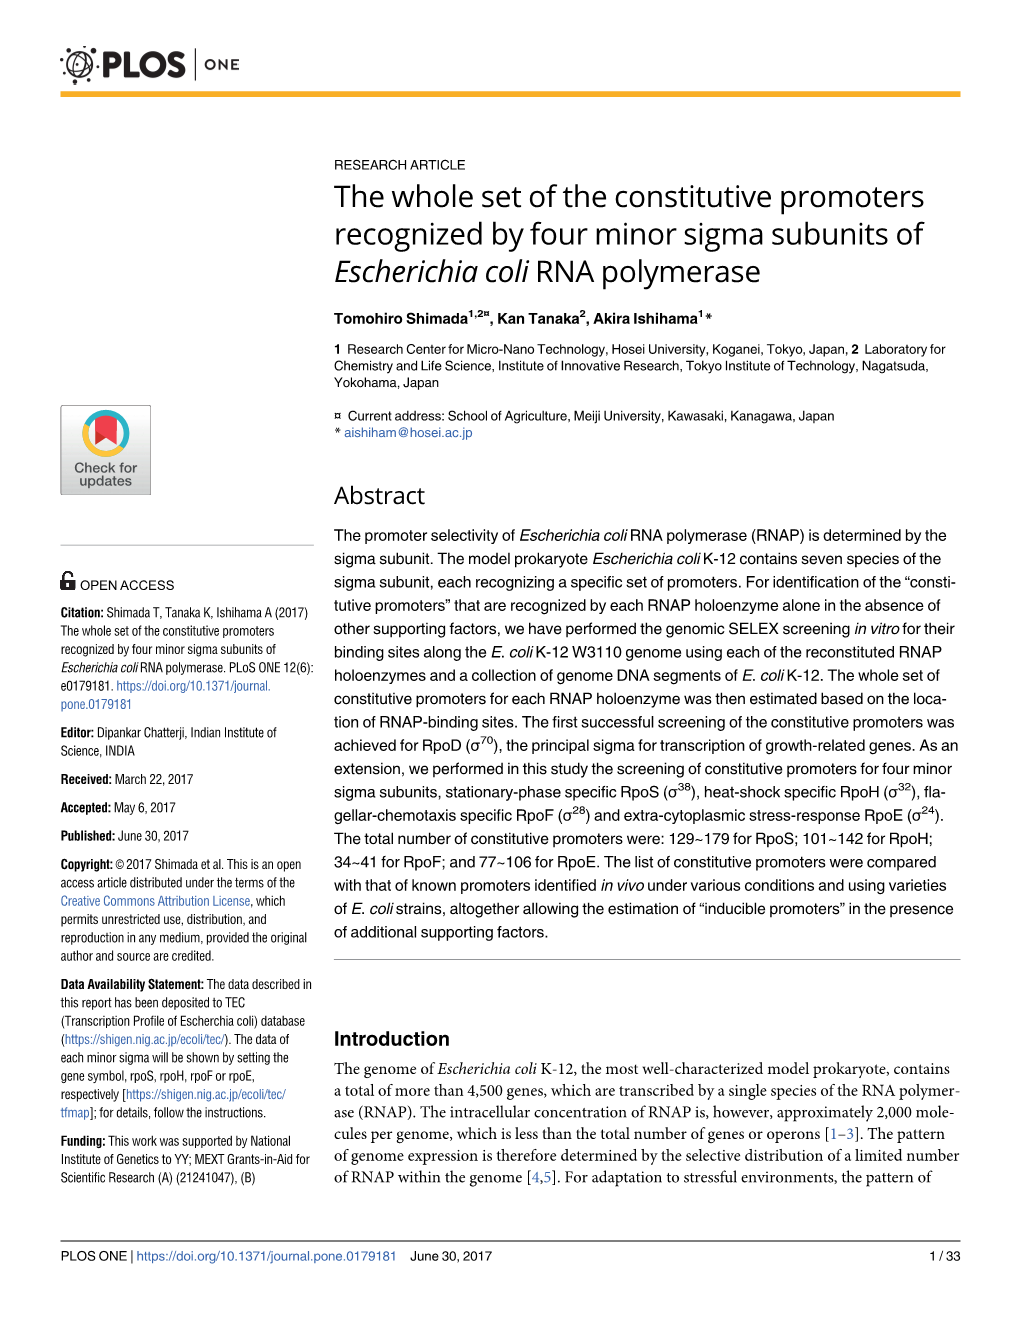 The Whole Set of the Constitutive Promoters Recognized by Four Minor Sigma Subunits of Escherichia Coli RNA Polymerase